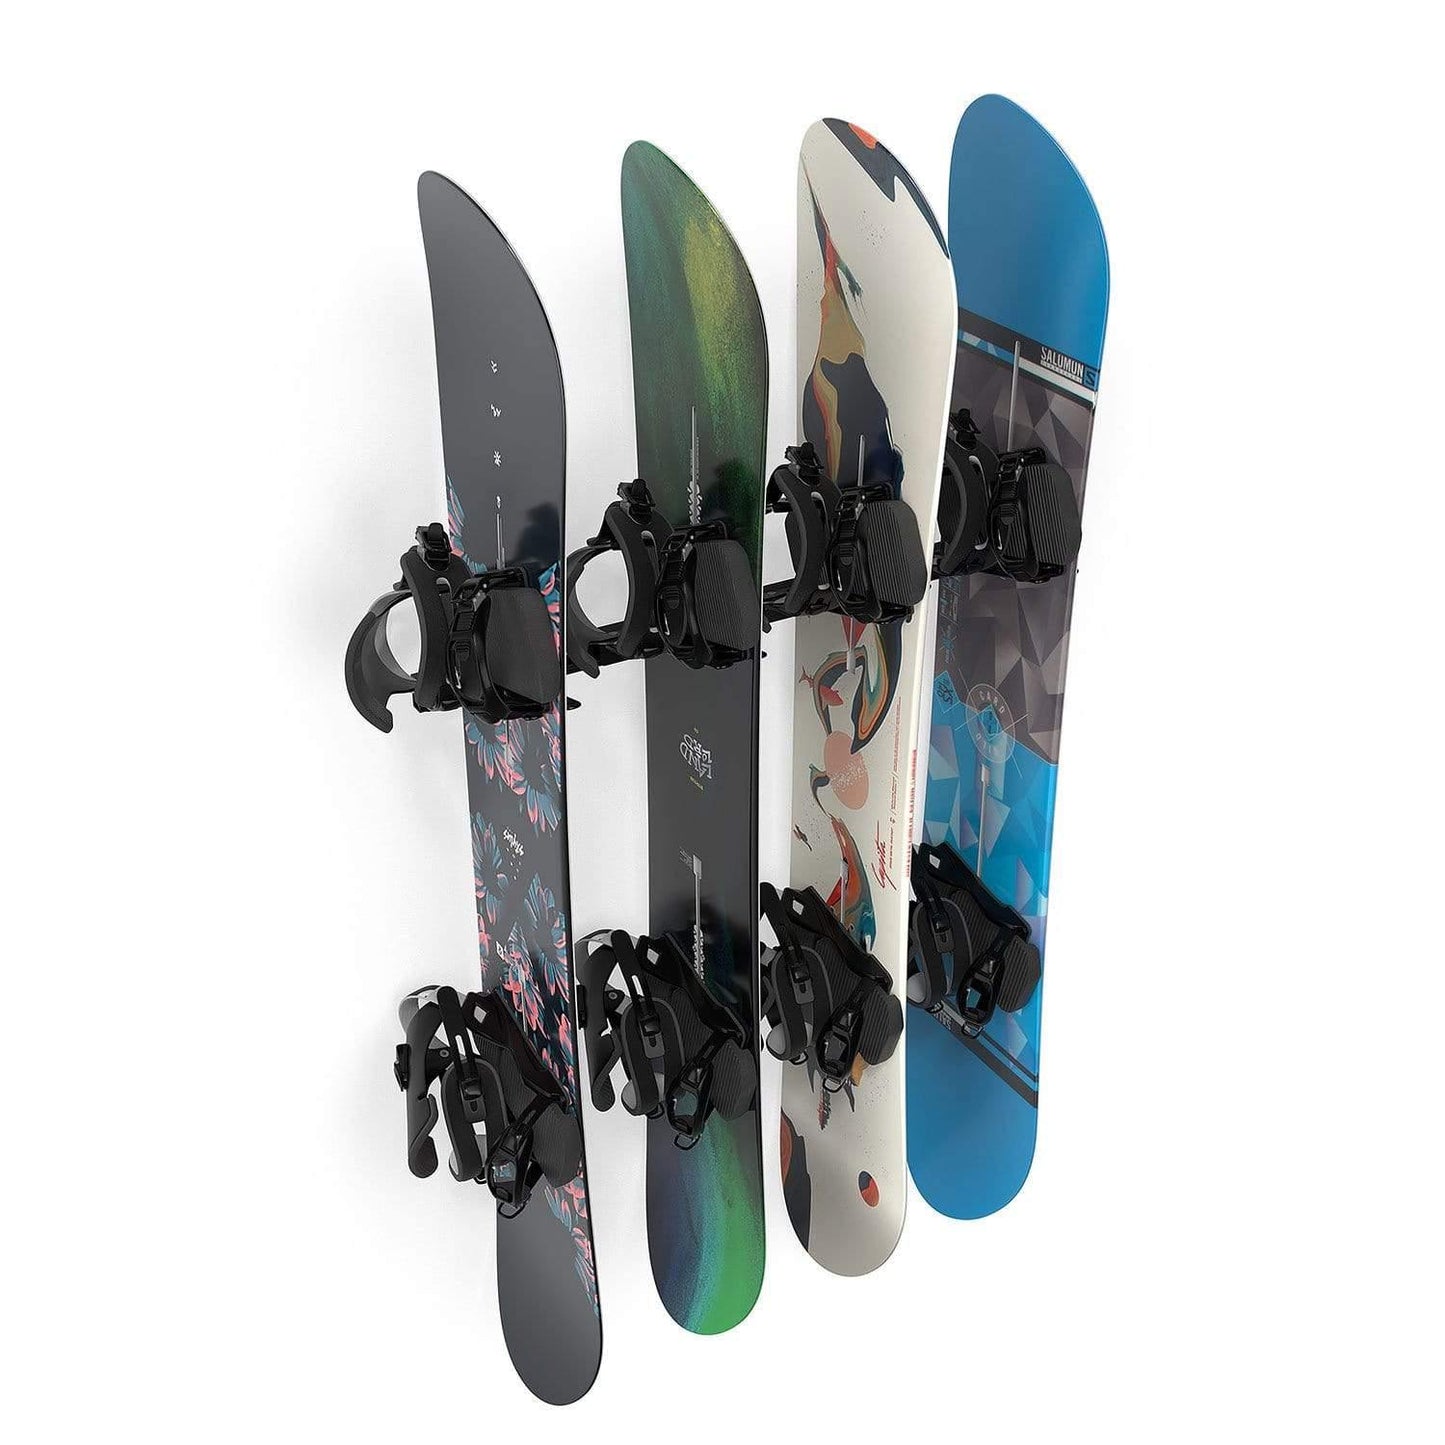 Wall mounted snowboard rack that fits up to 4 snowboards vertically on a garage or shed wall